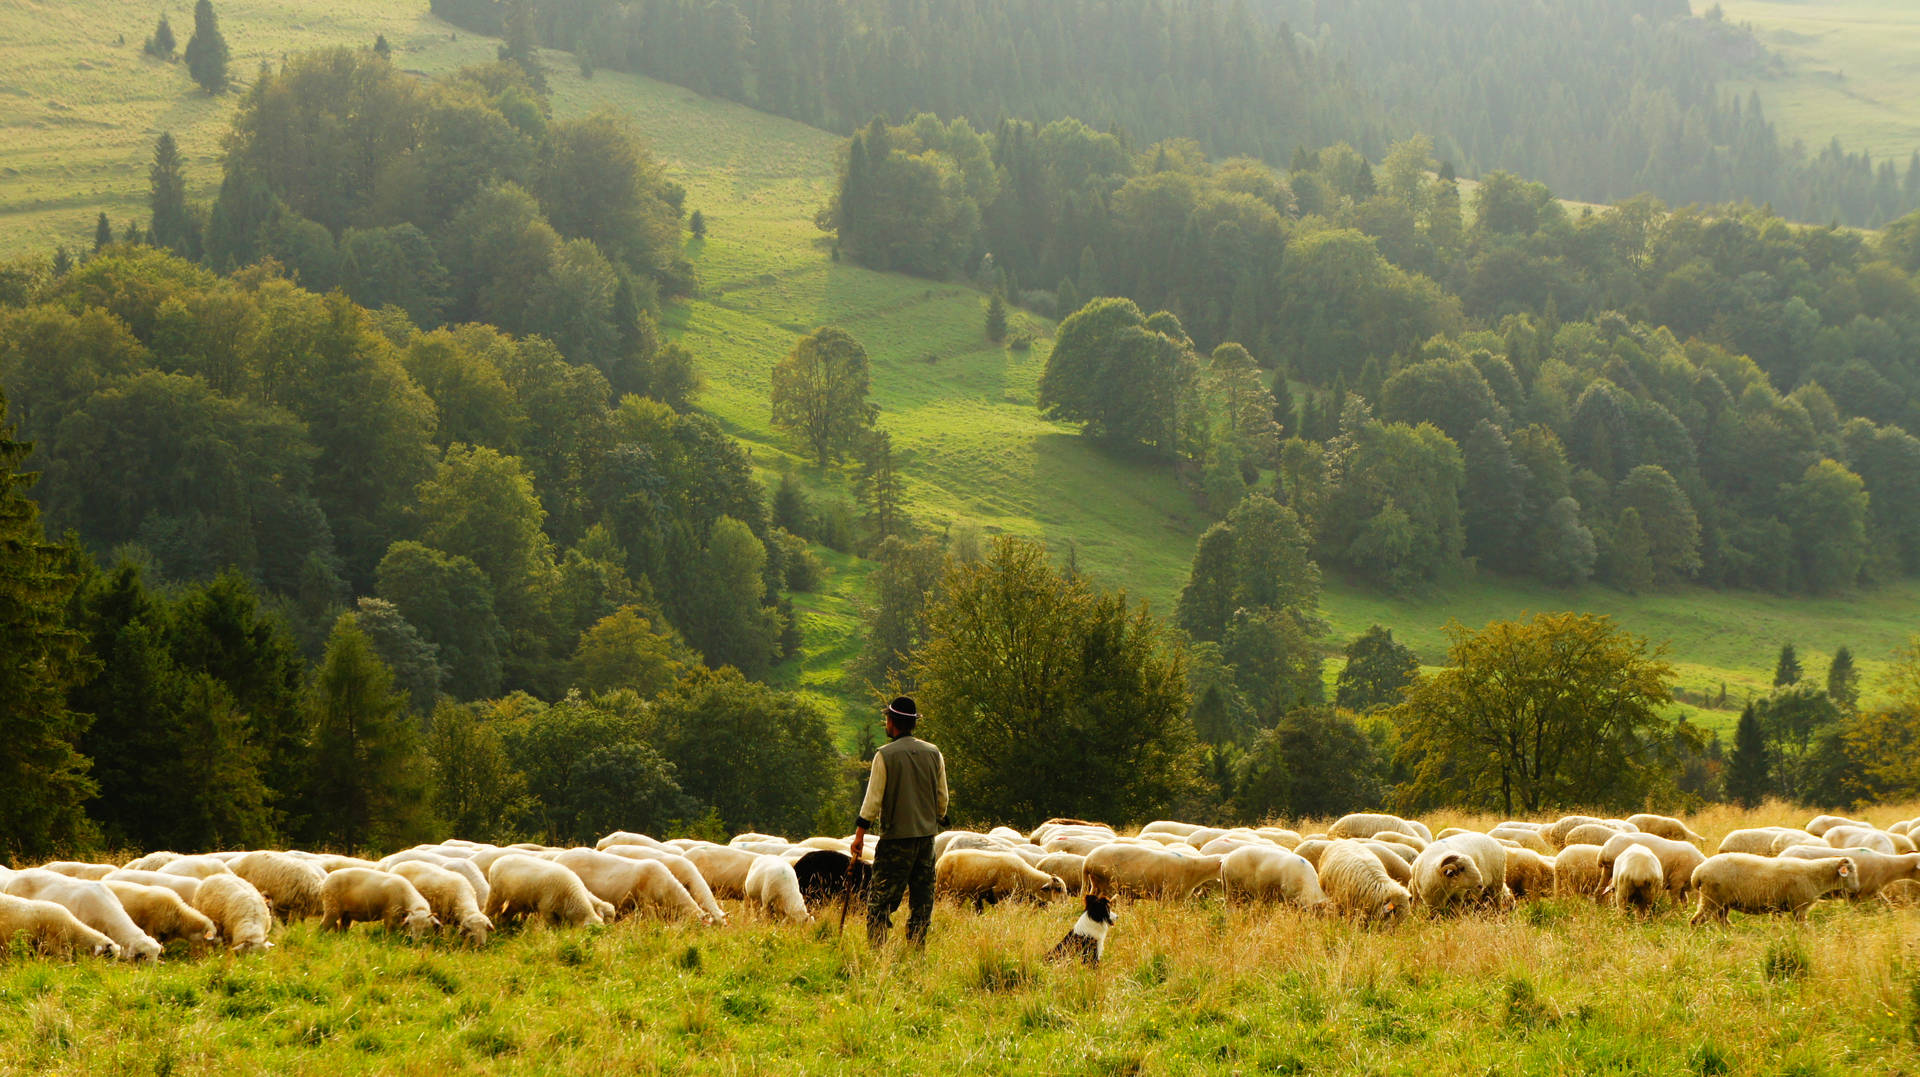 Man With Group Of Sheep